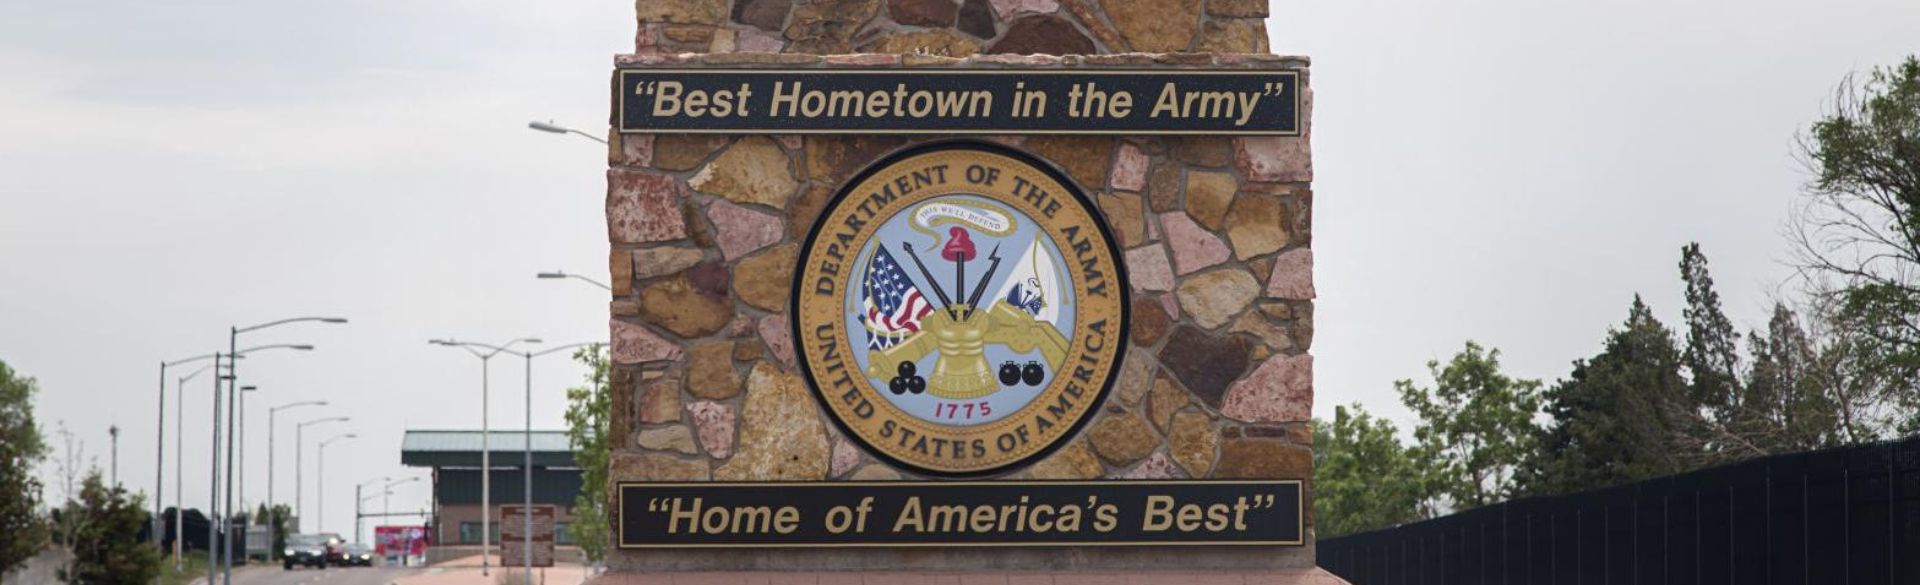 Fort Carson army base sign